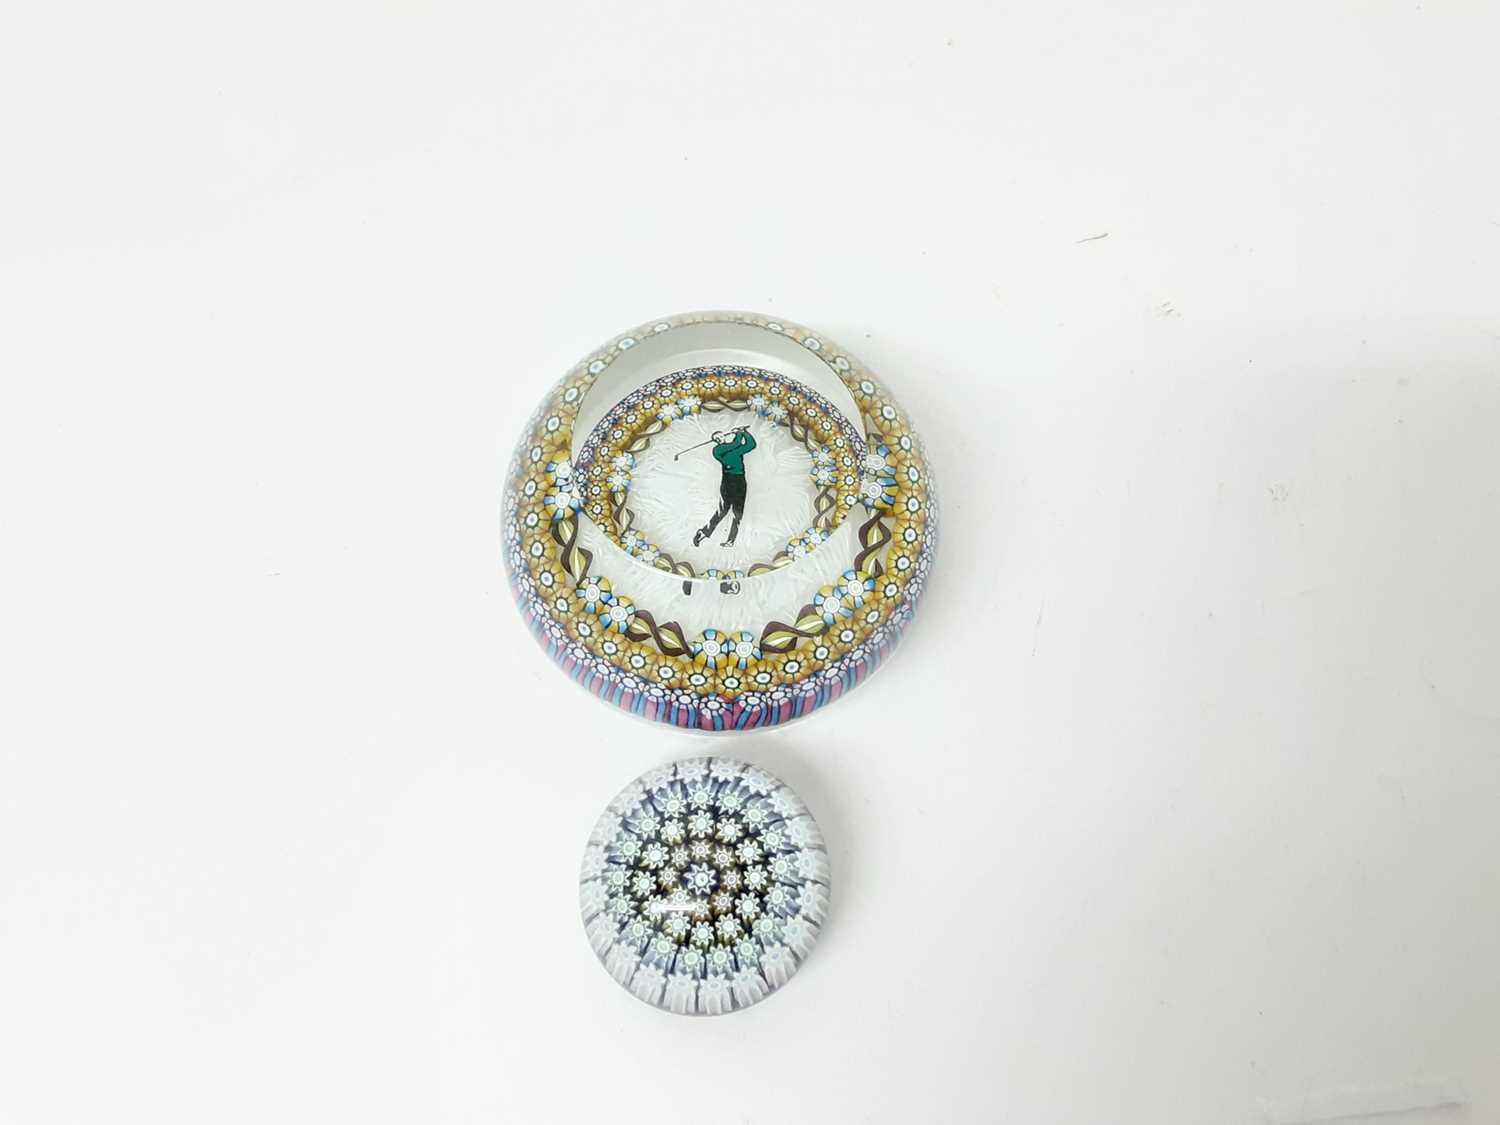 Lot 94 - Good quality Perthshire Golfer paperweight with millefiori decoration and one other small Perthshire paperweight (2)